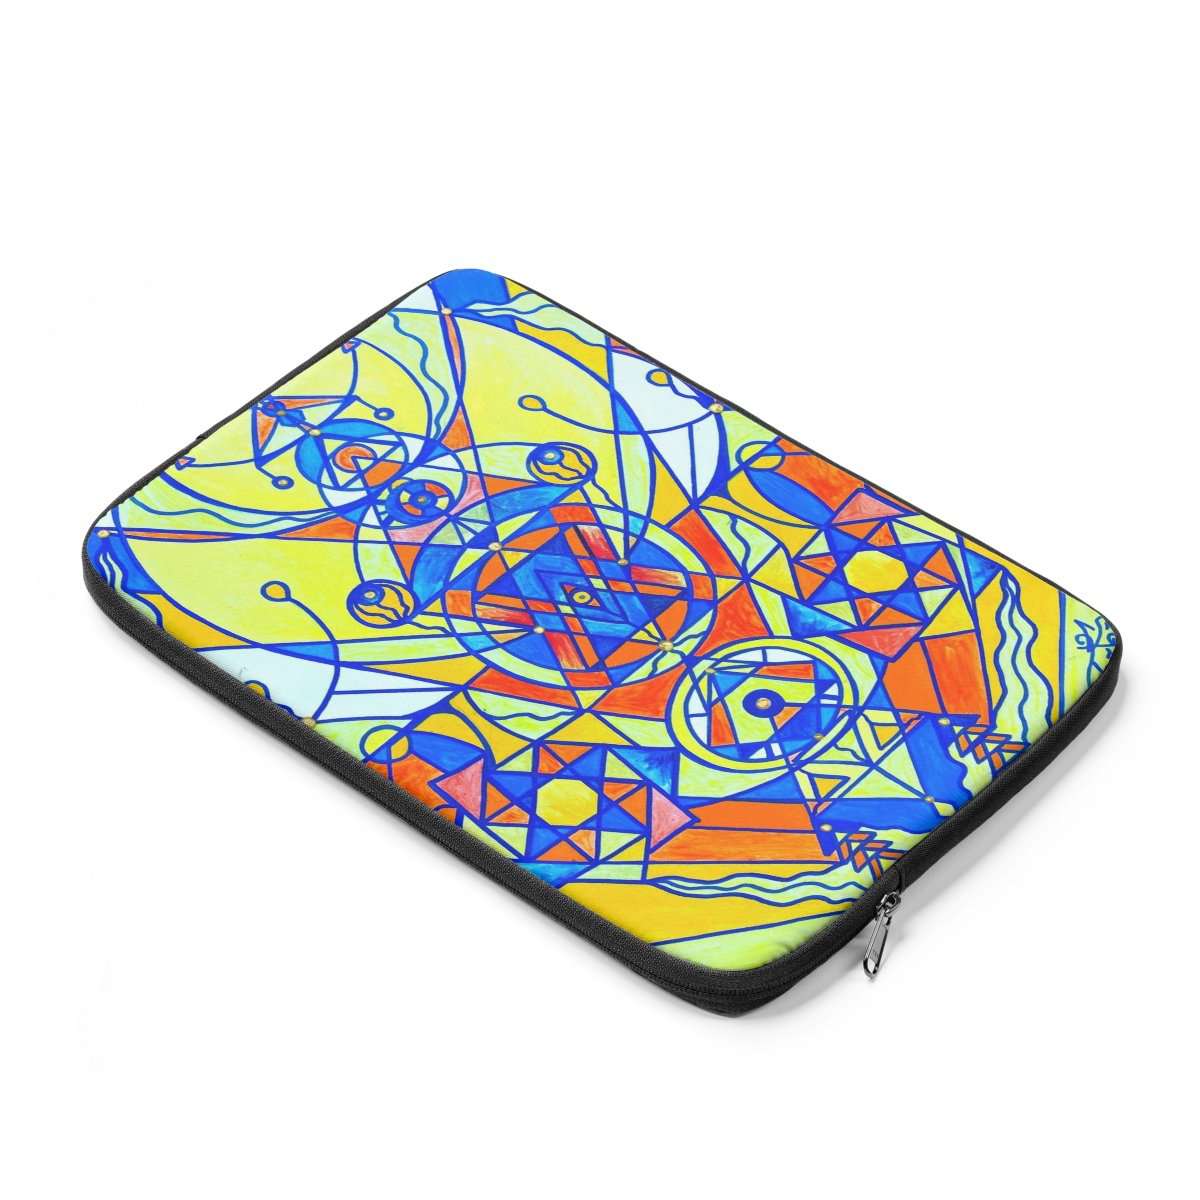 shop-for-the-newest-happiness-pleiadian-lightwork-model-laptop-sleeve-online-sale_1.jpg